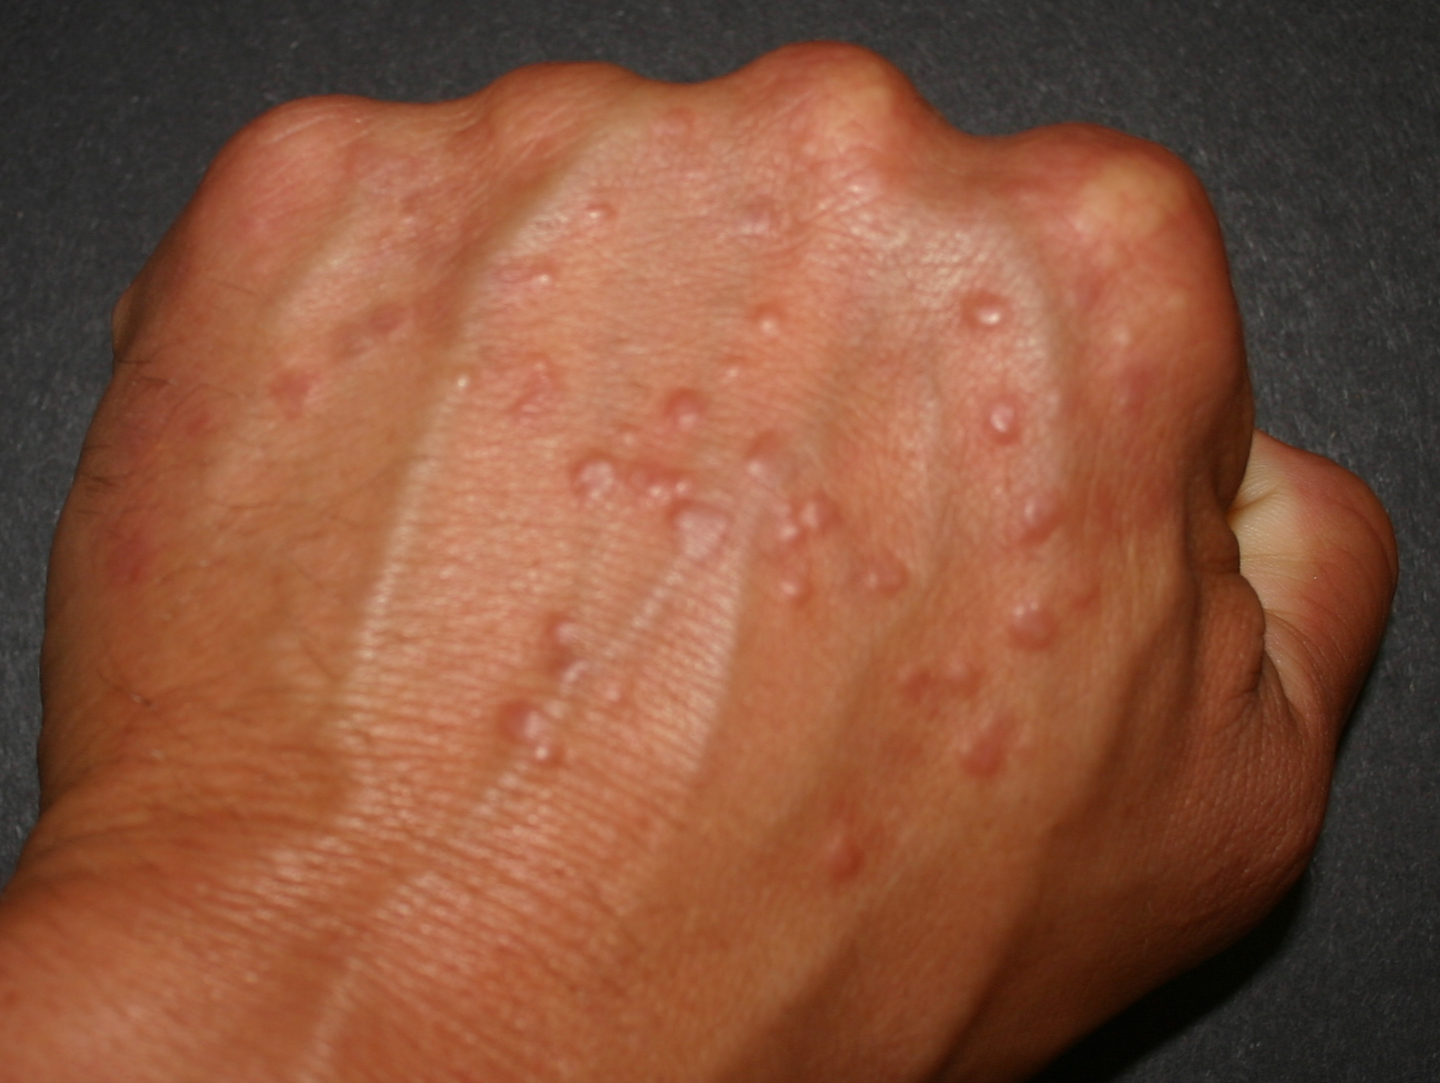 rashes on hands and arms